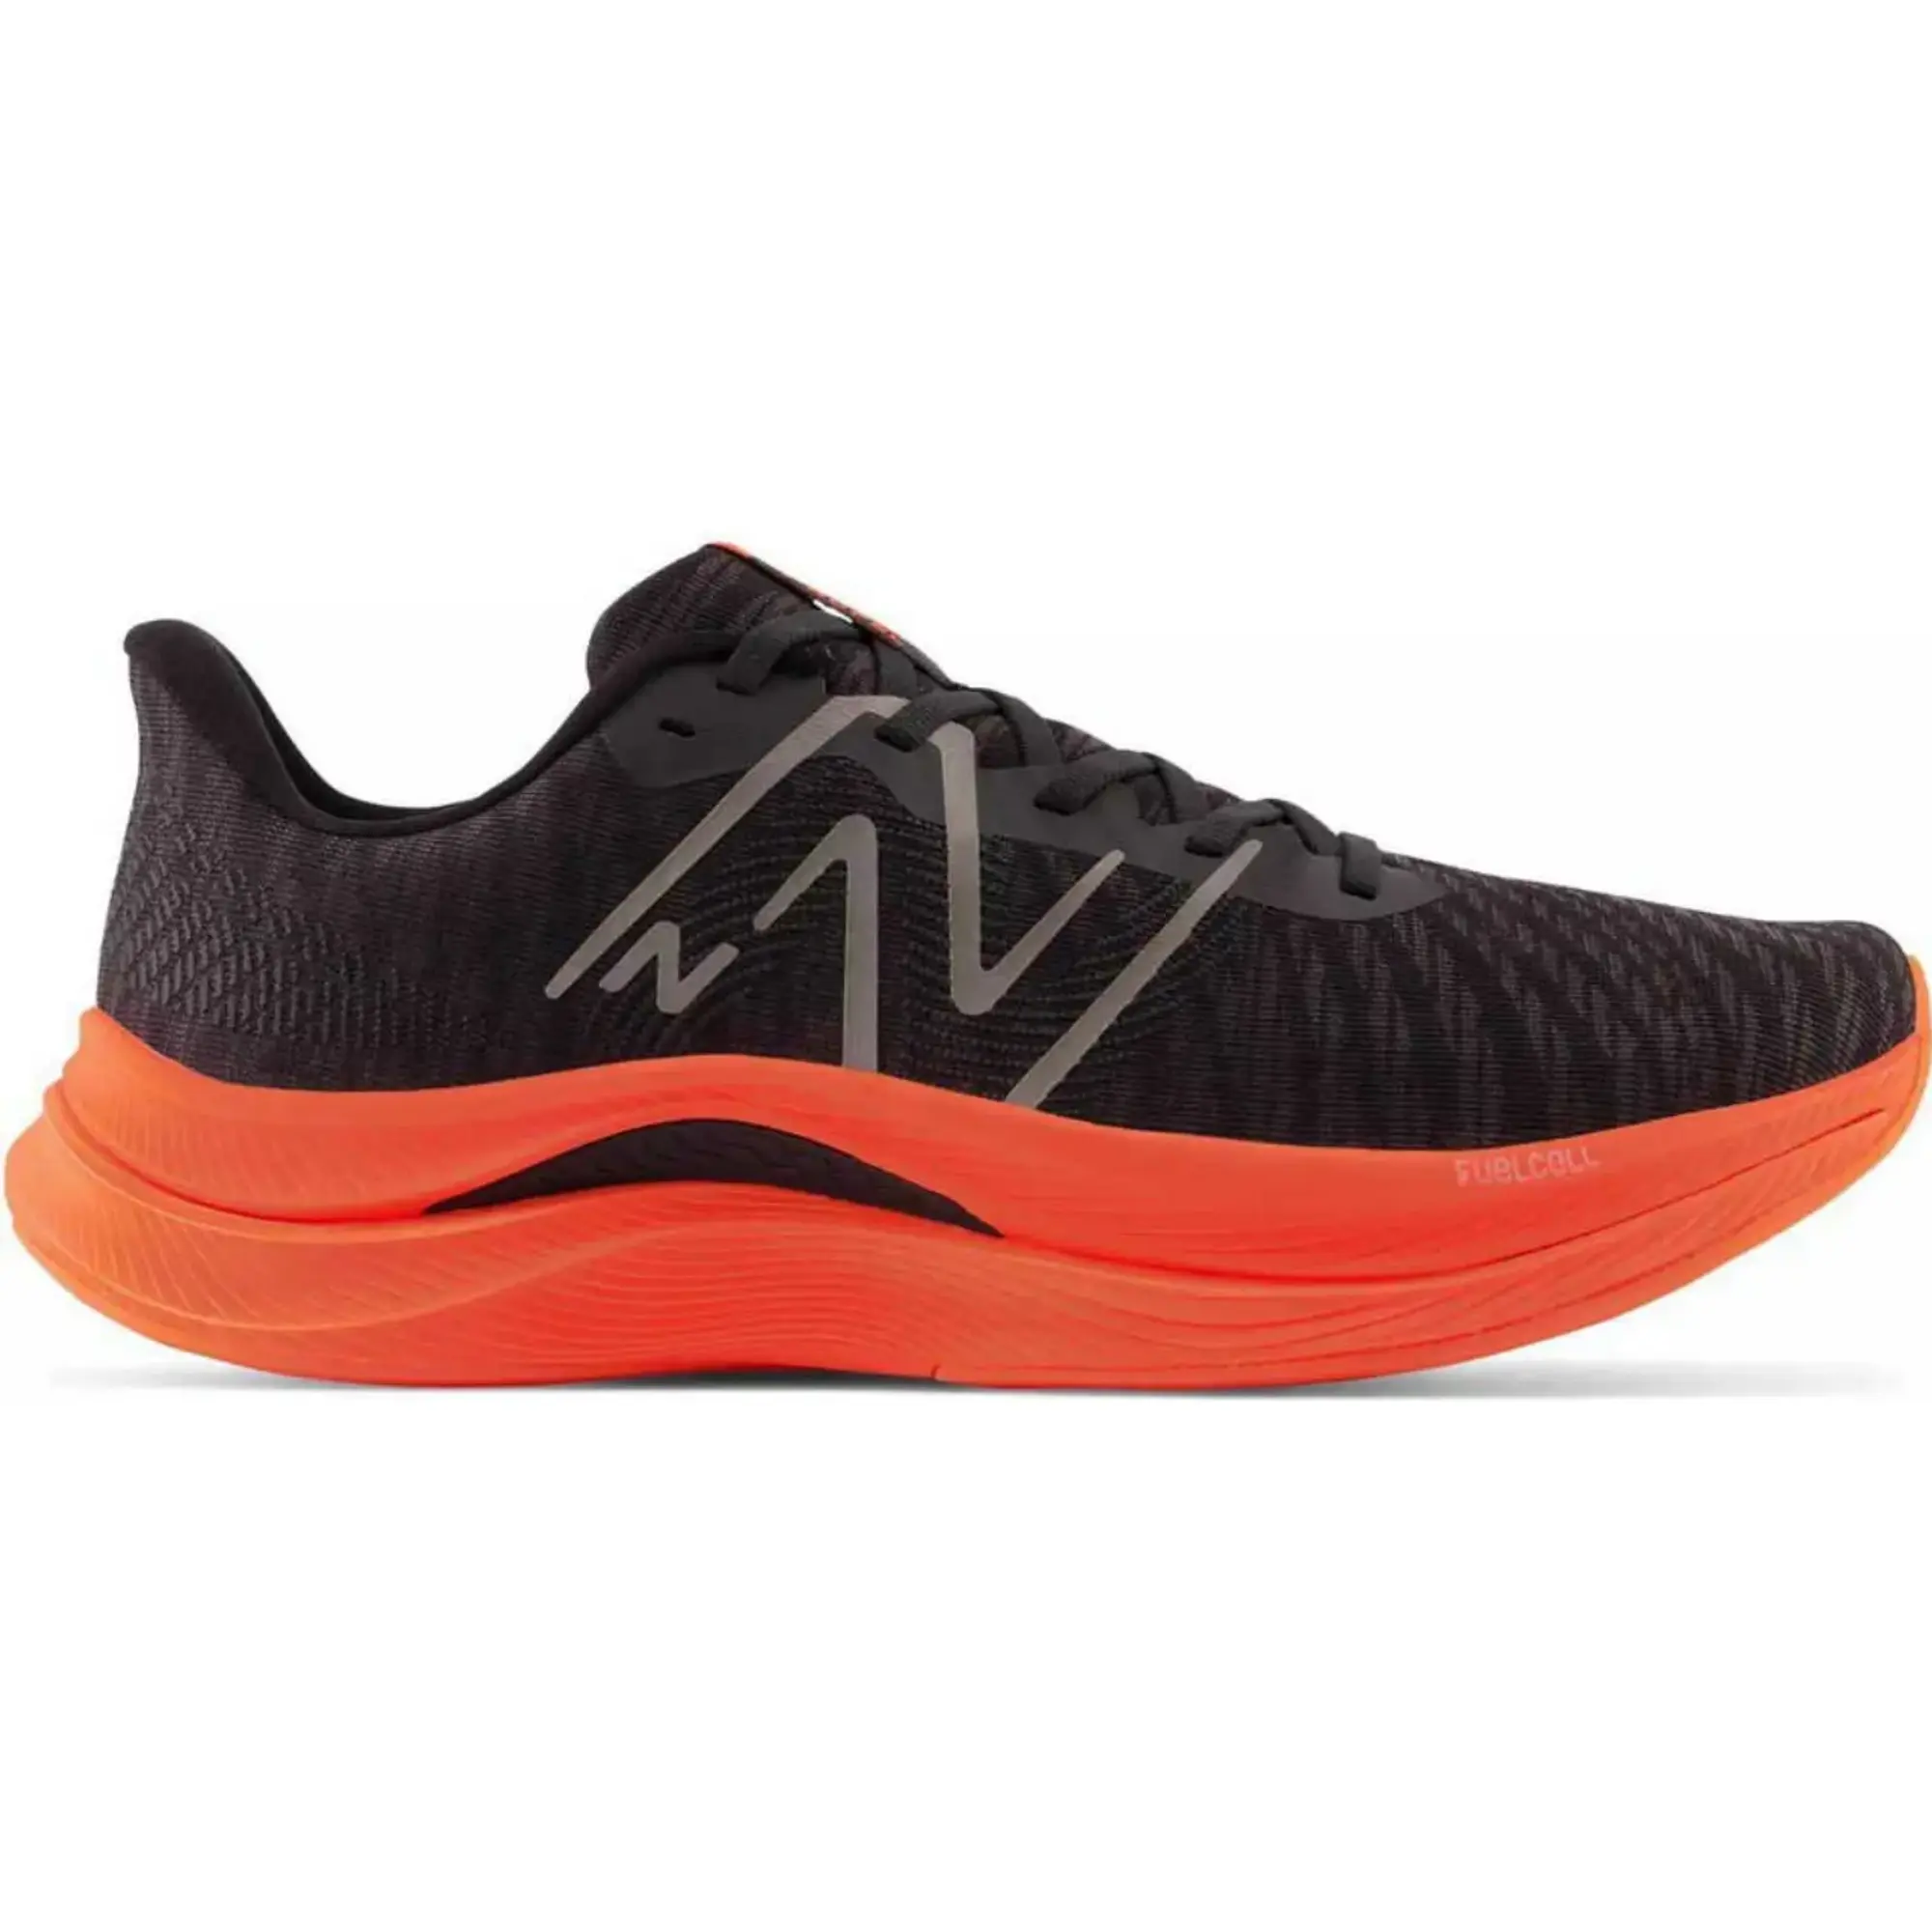 New Balance Fuelcell Propel V4 Running Shoes  - Black